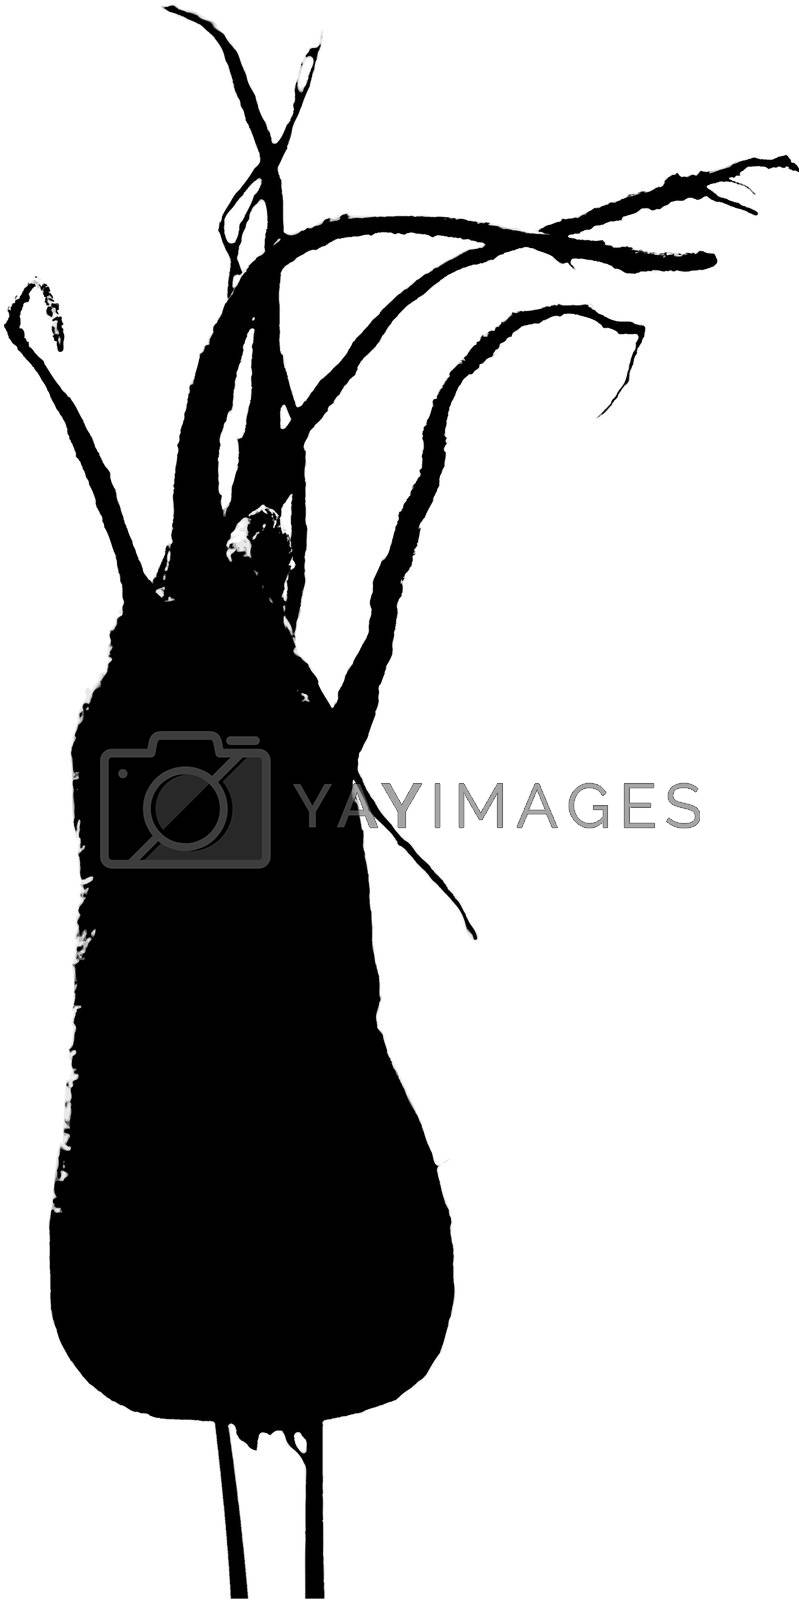 Royalty free image of Vectorized Freaky Parsnip by pdtnc